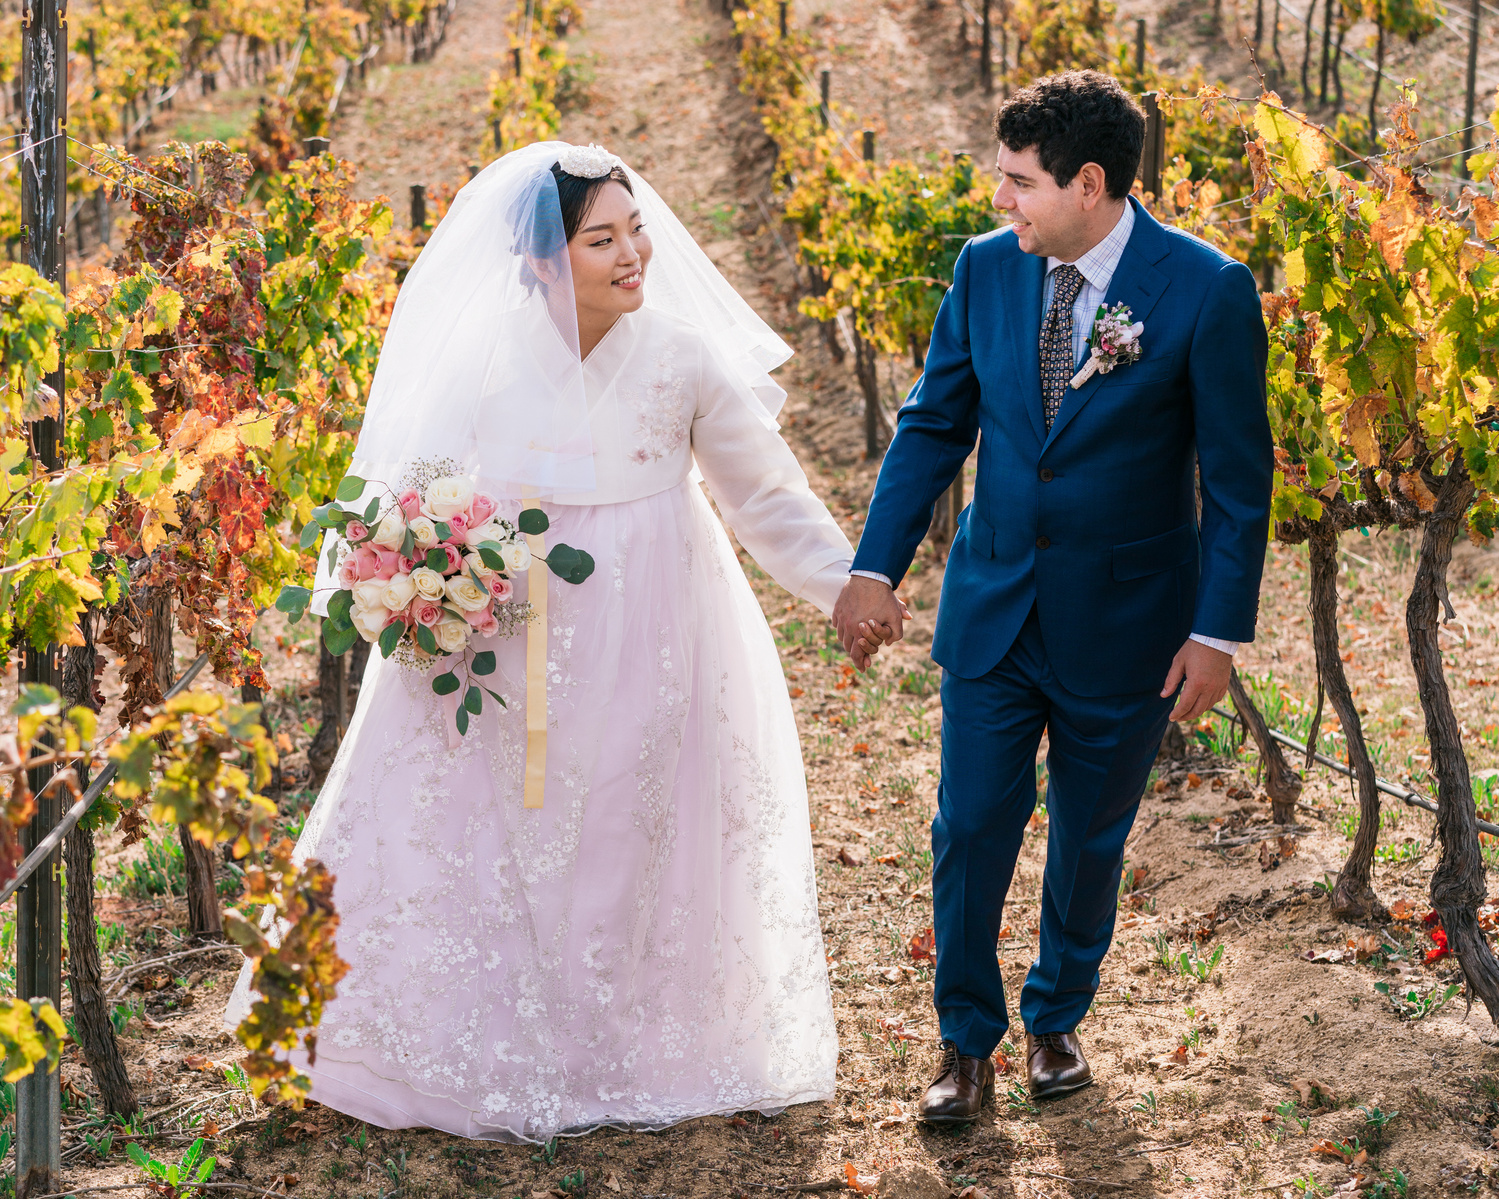 korean bride in her hanbok and groom walk among the vines in the vineyard hand in hand staring into each others eyes